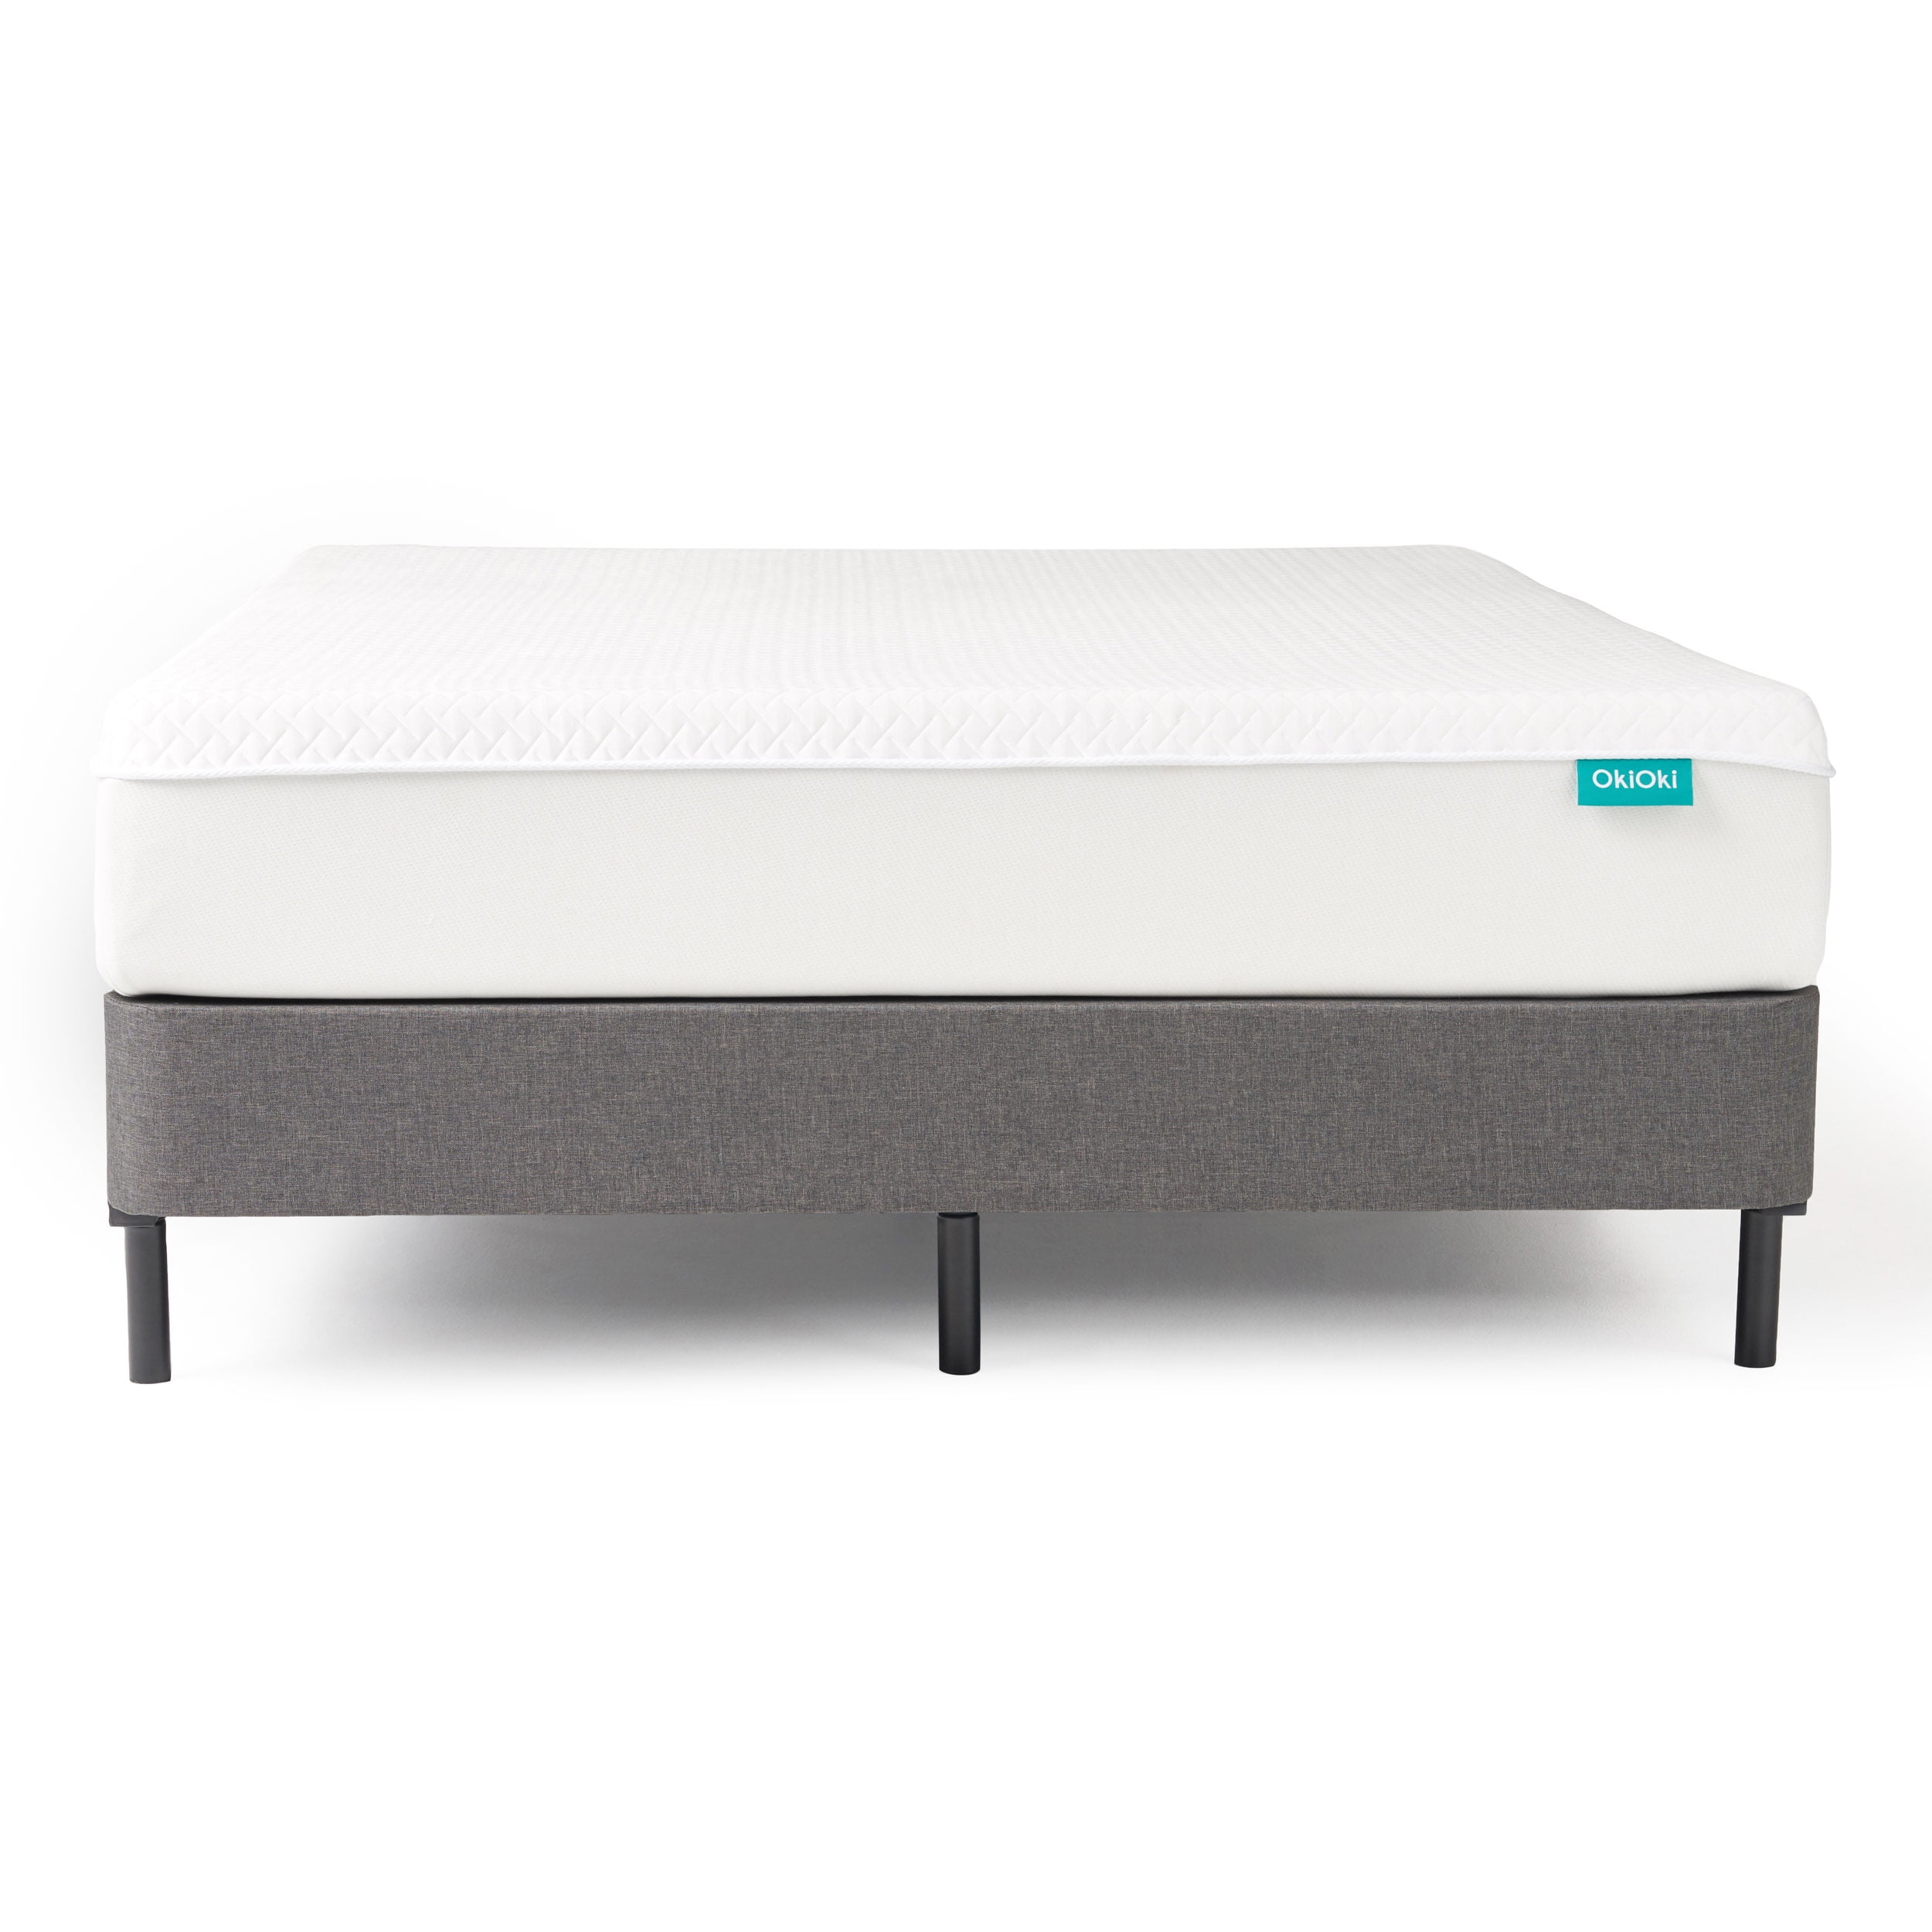 Medium-Firm OkiOki Hybrid Foam and Coil OkiFlex Mattress with Cooling Zip Cover 